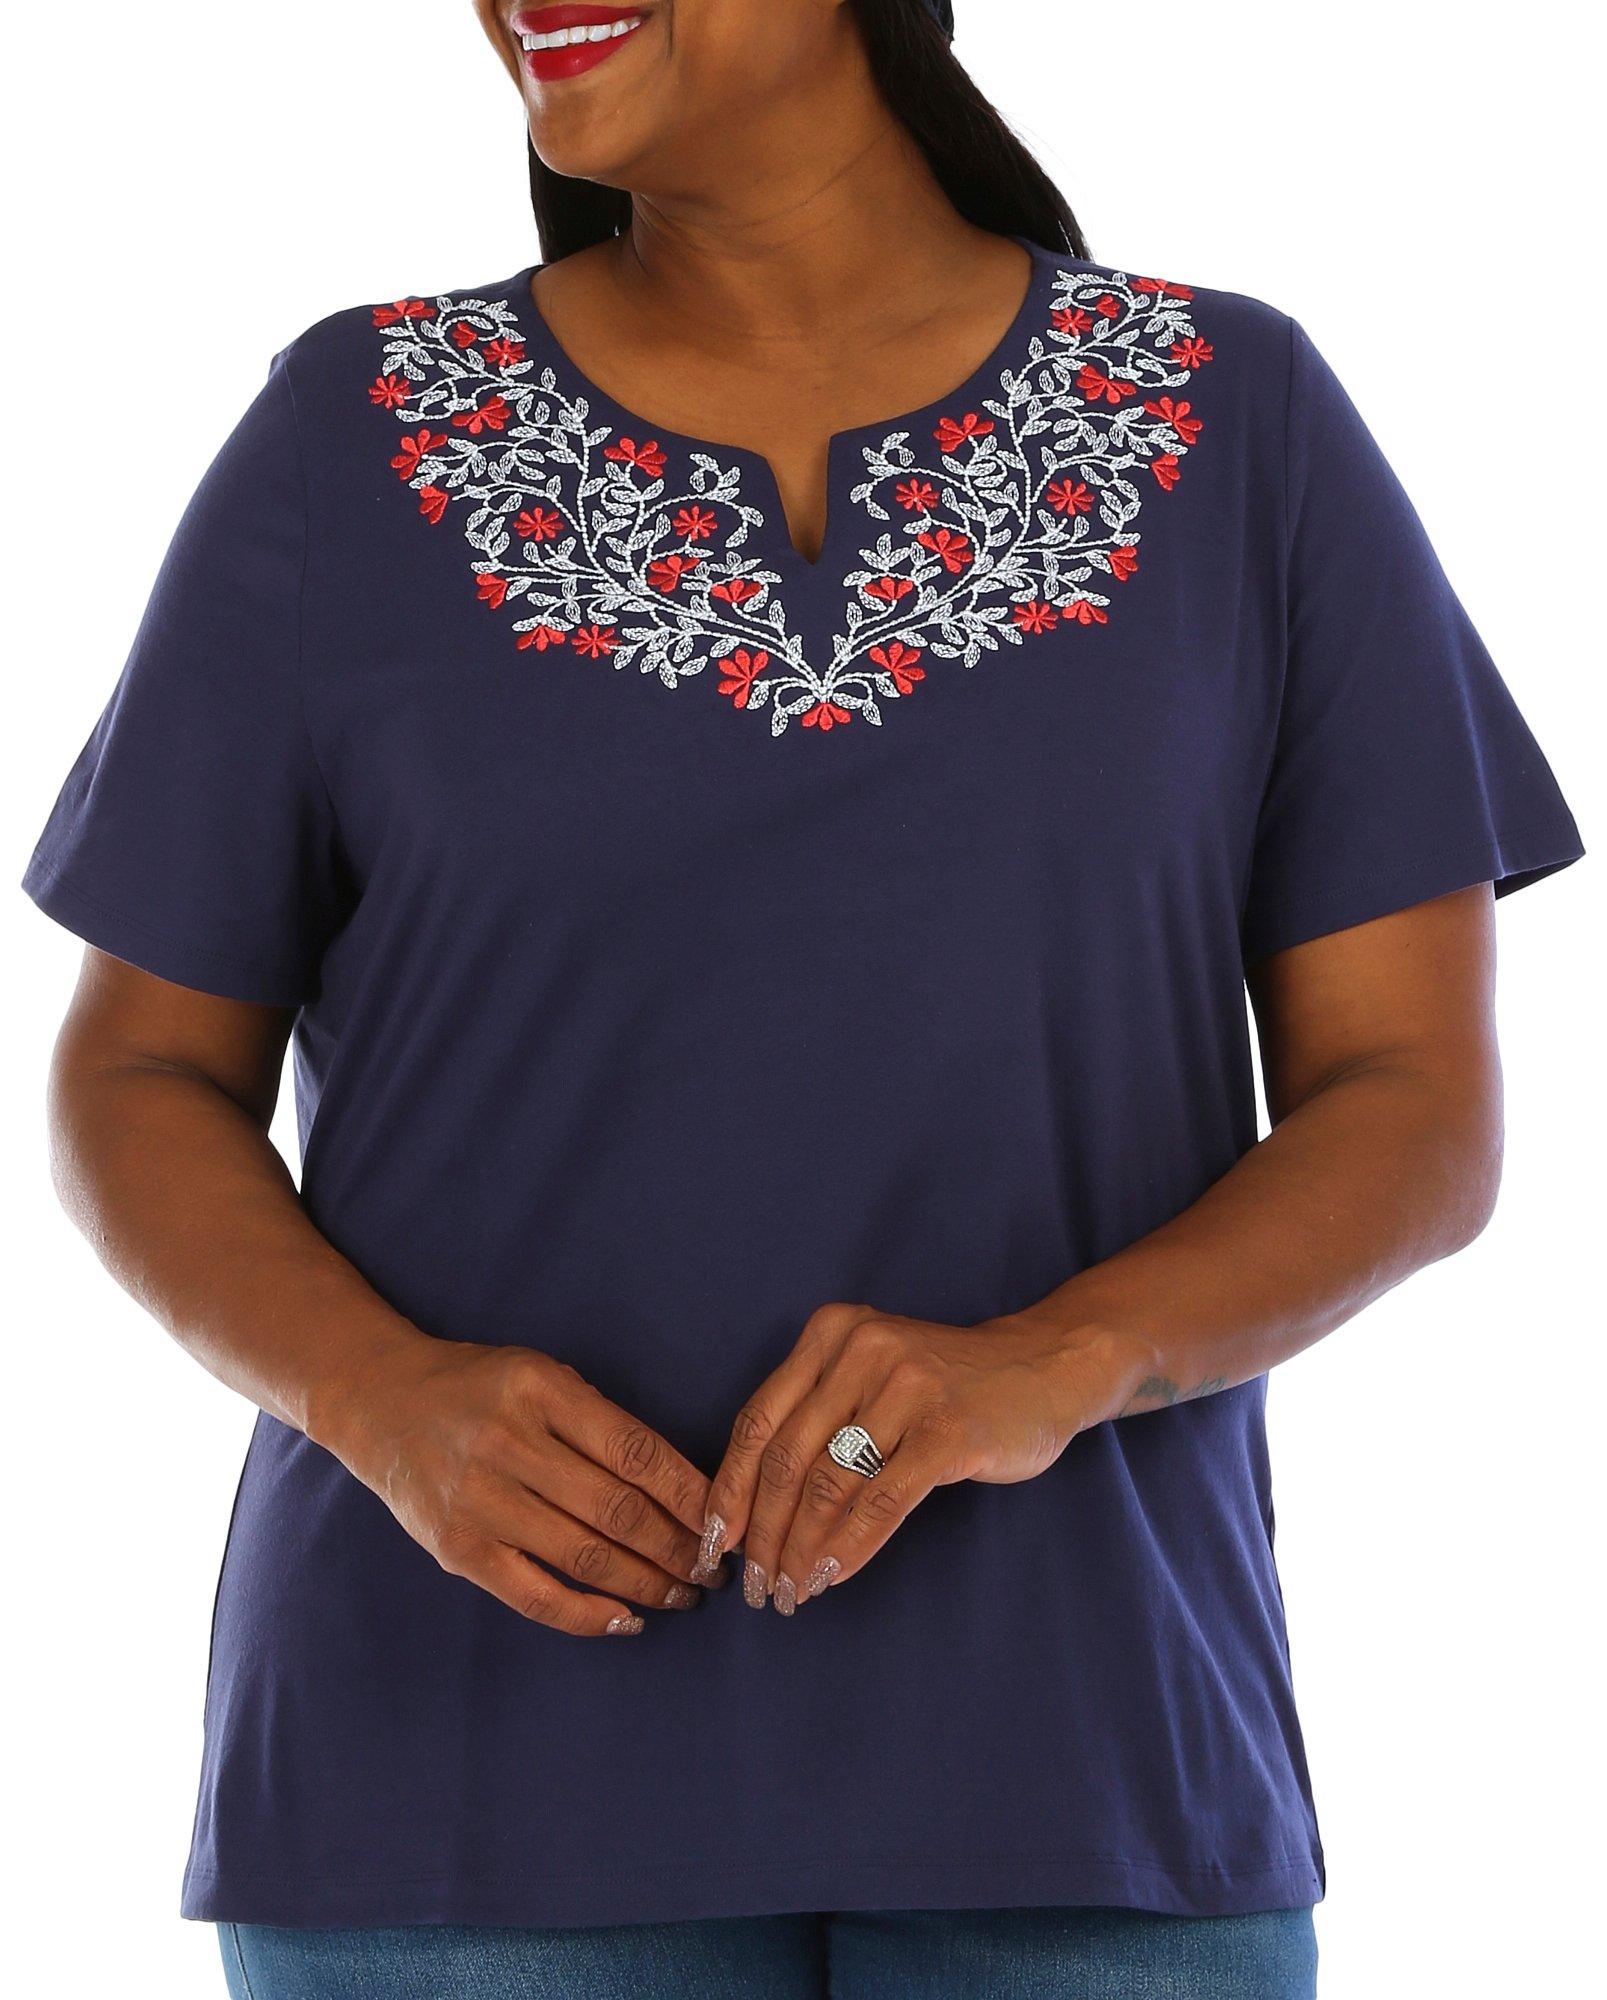 Coral Bay Plus Embroidered Floral Yoke Short Sleeve